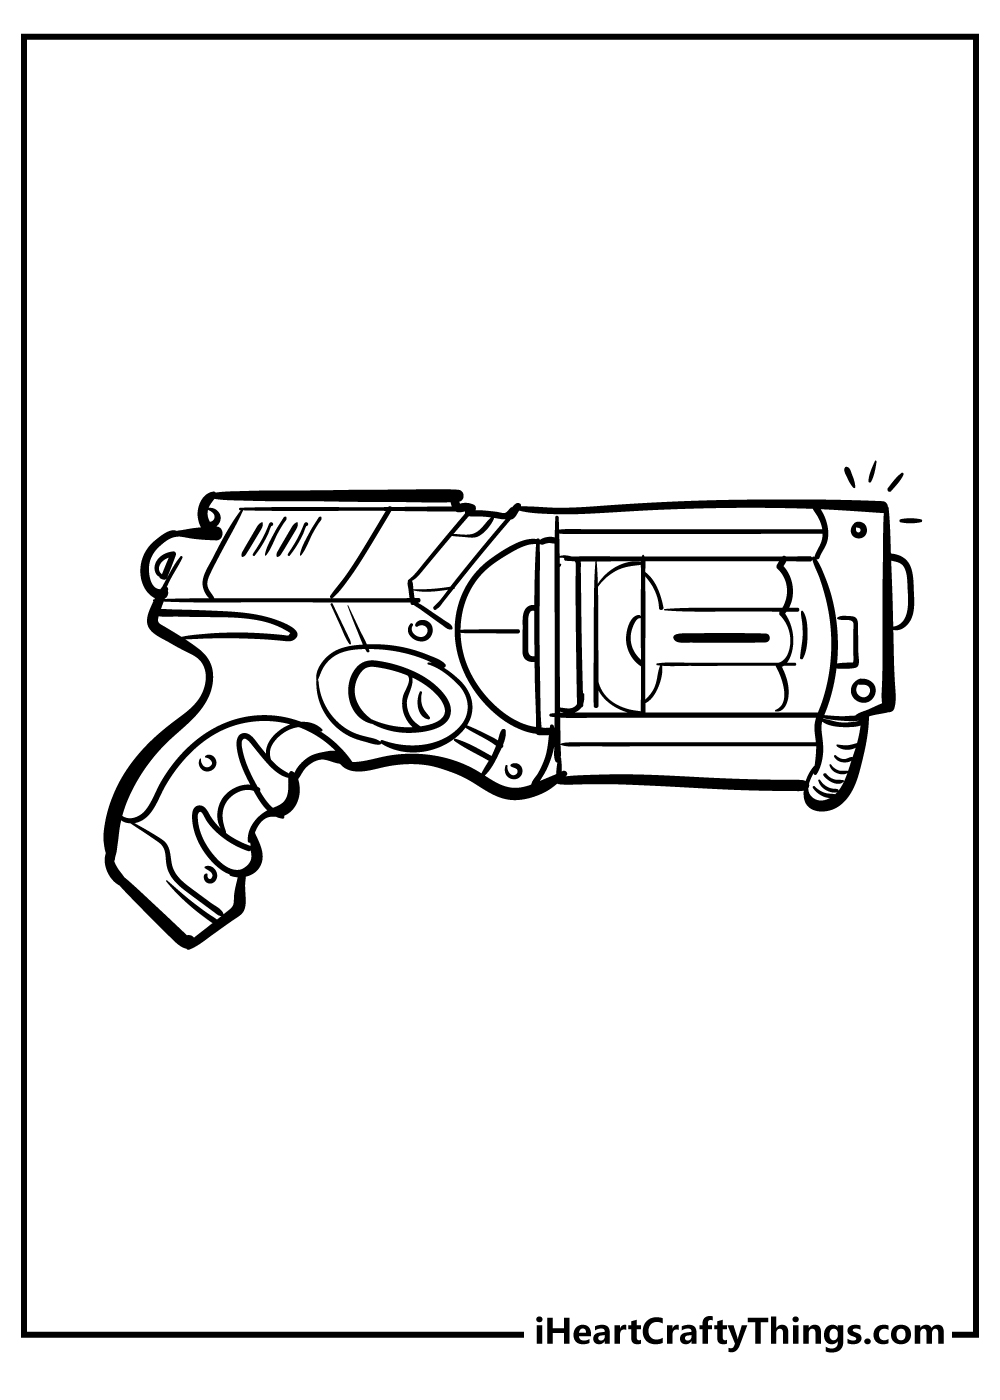 Nerf Gun Coloring Pages for kids free download